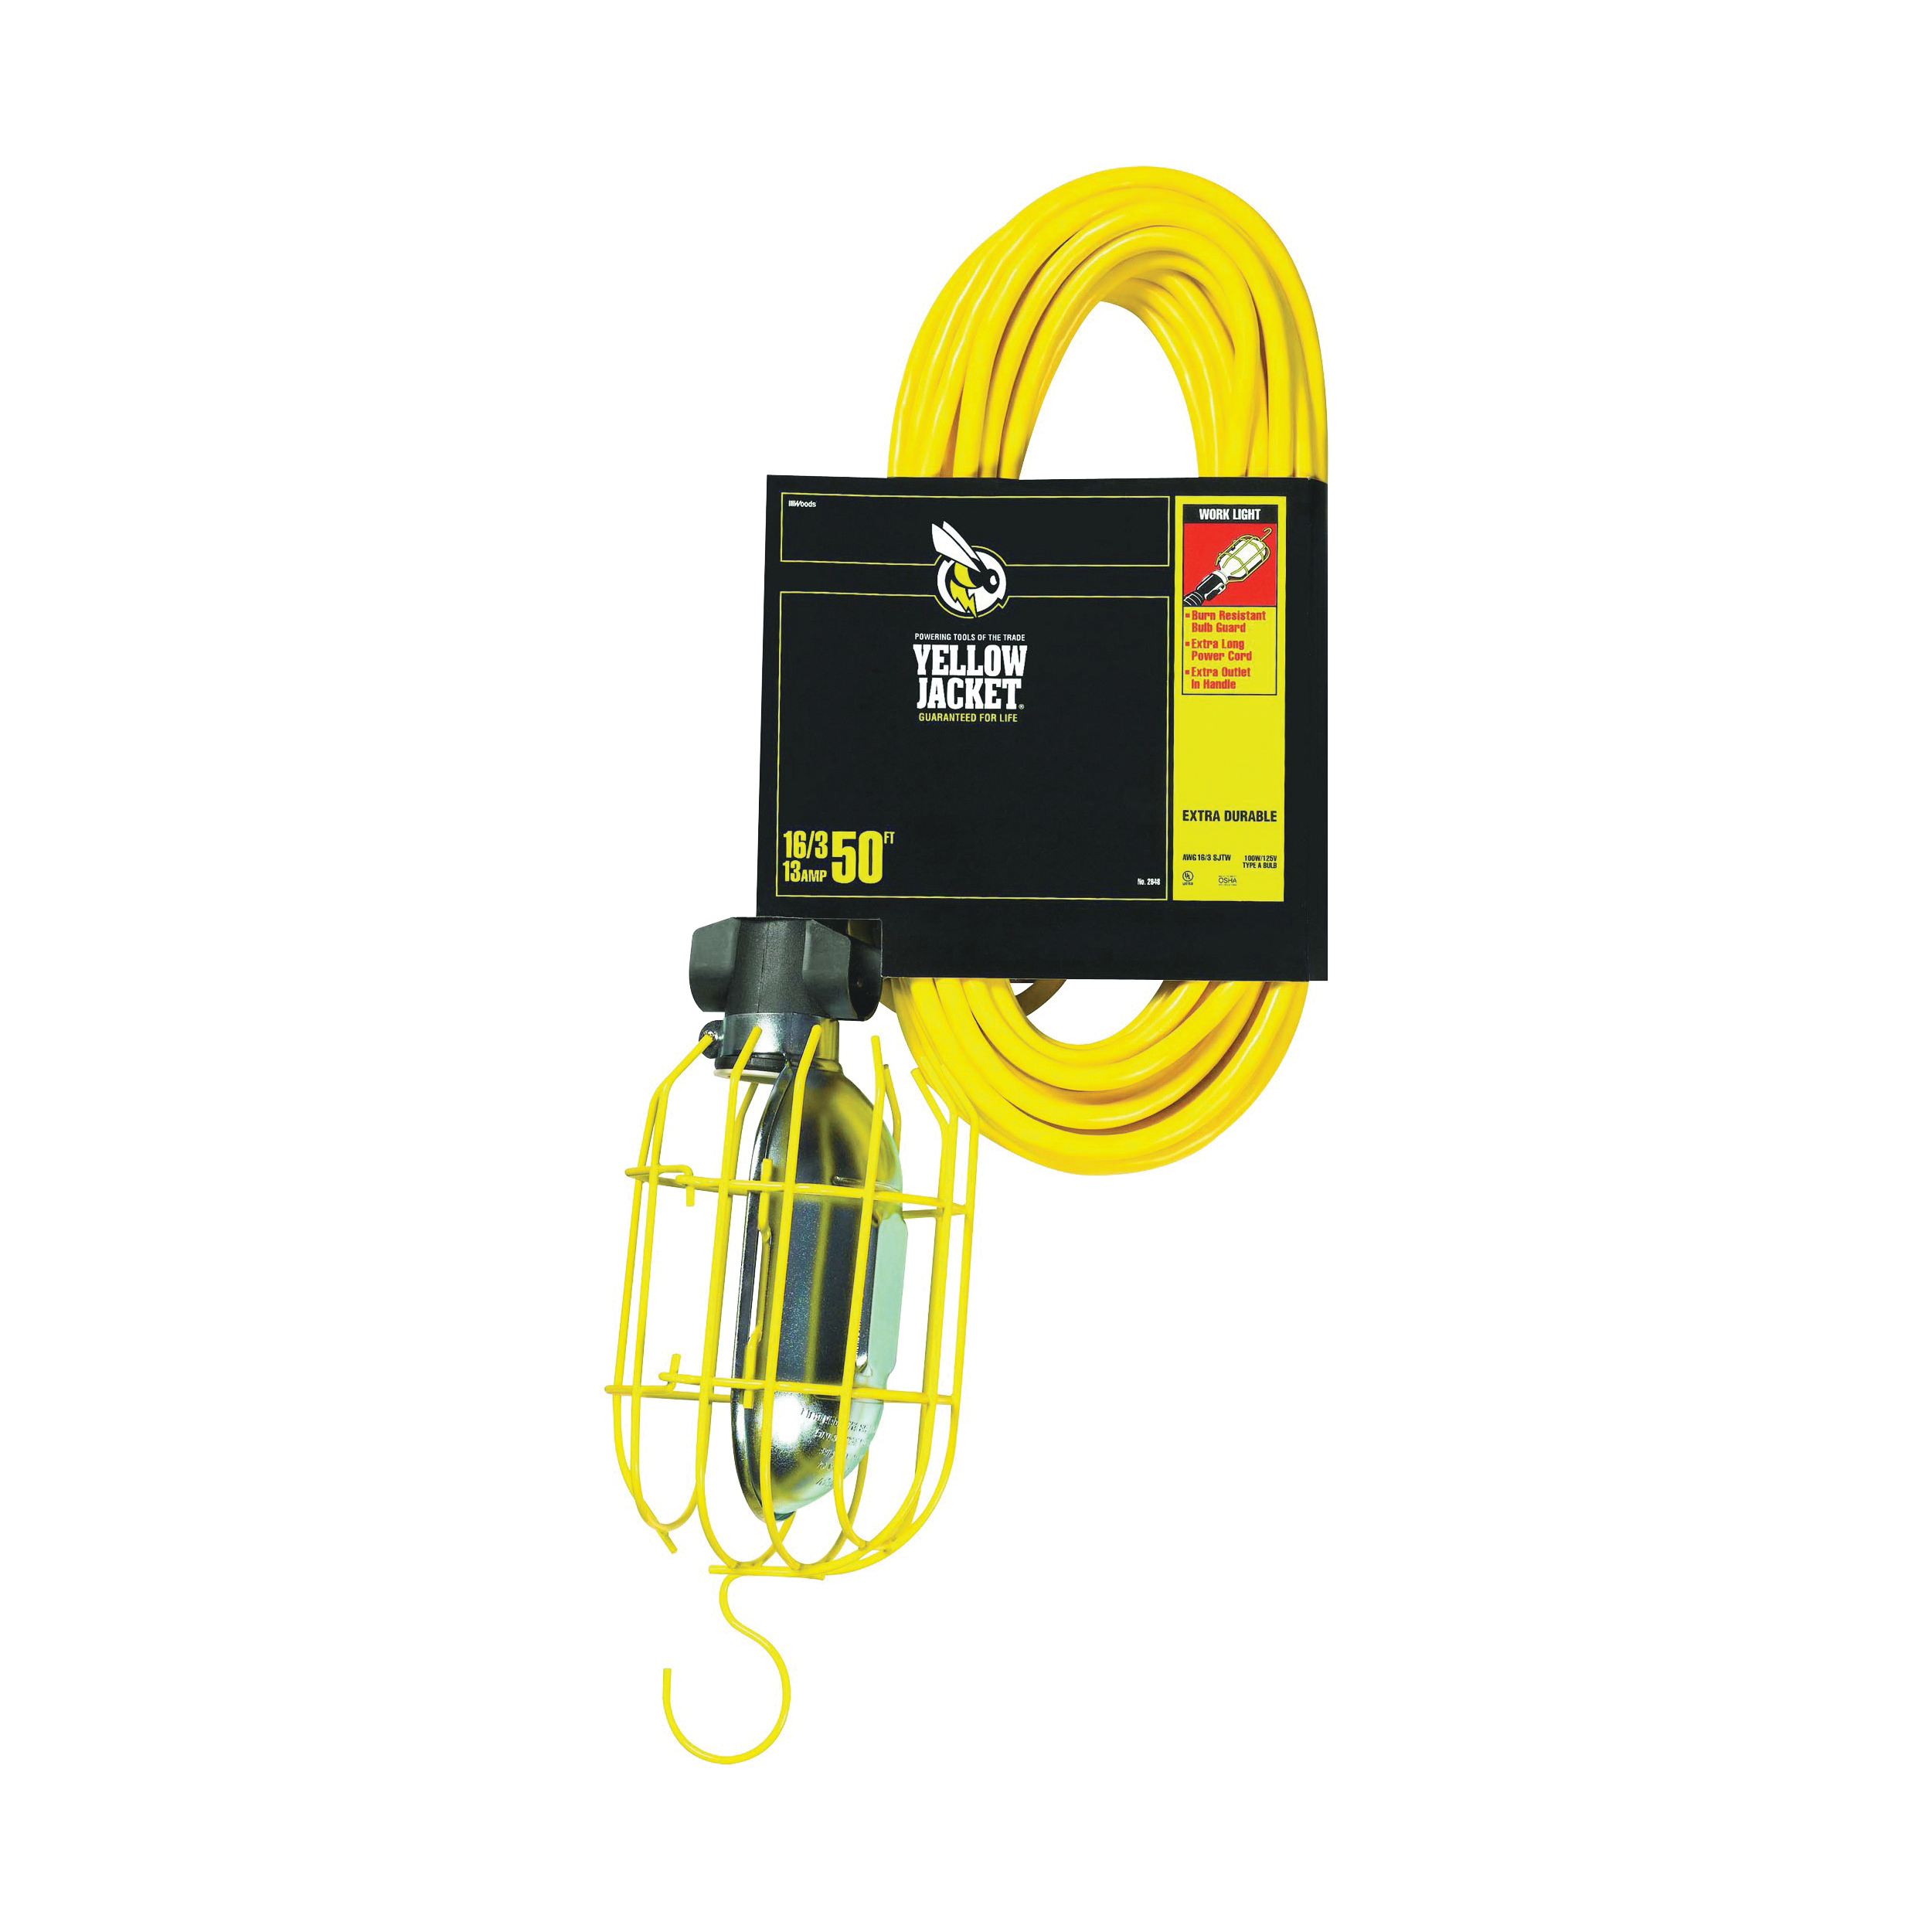 2948 Work Light with Outlet and Metal Guard, 13 A, 120 V, Yellow